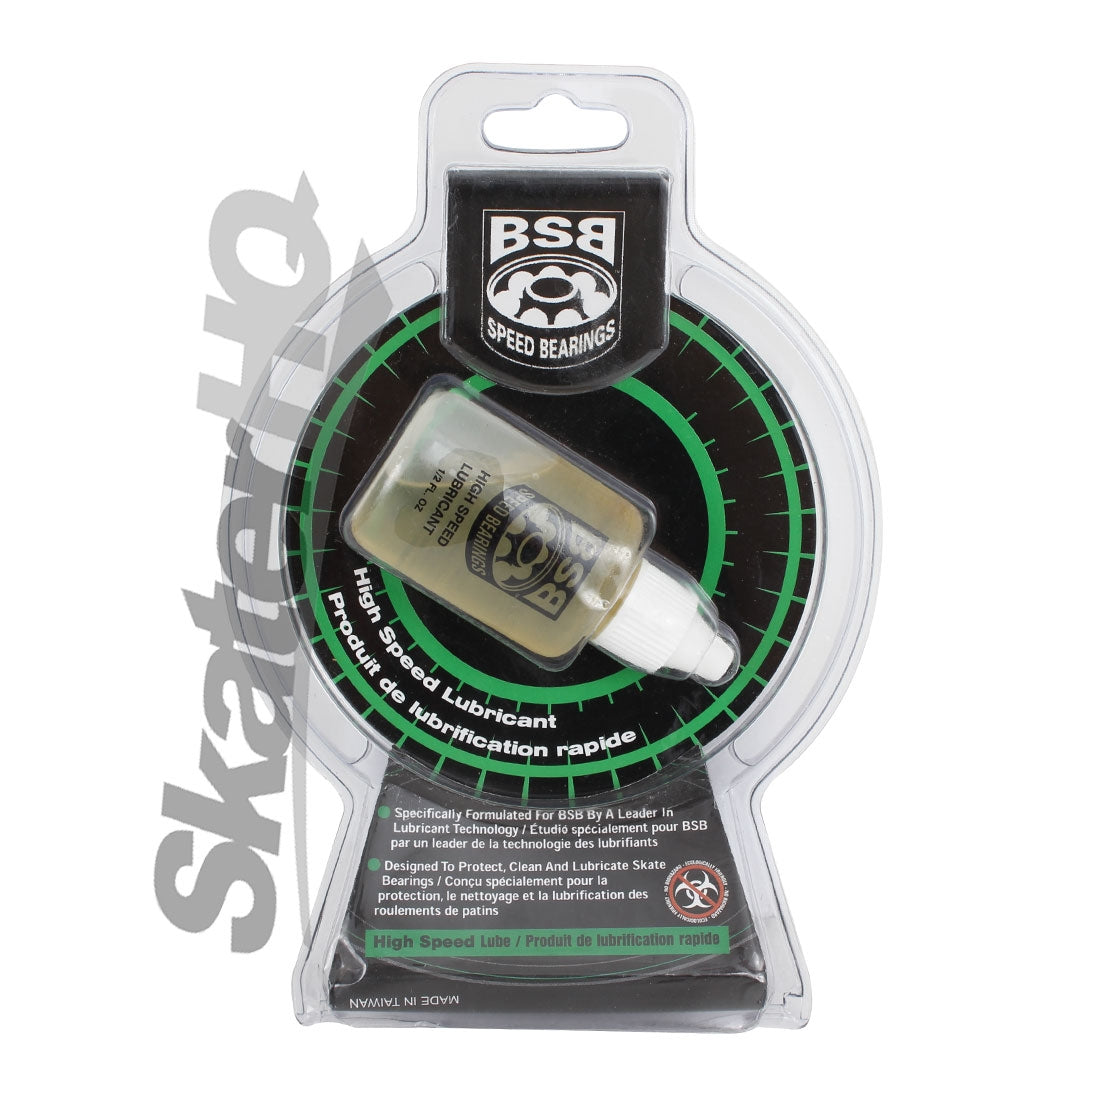 BSB Bearing Lube Roller Skate Hardware and Parts